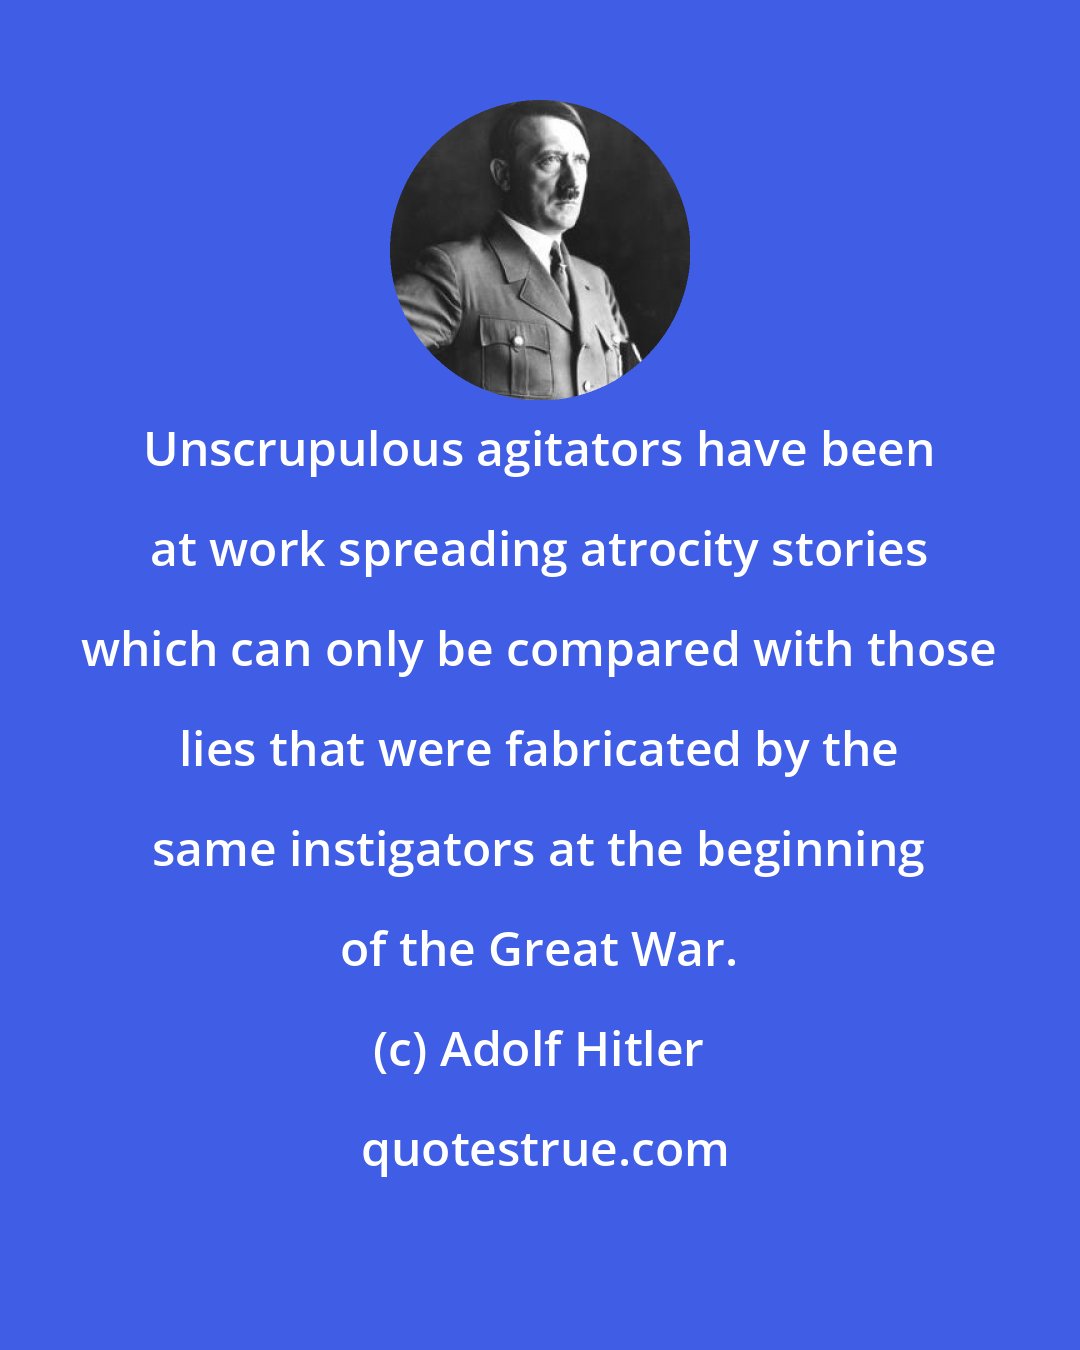 Adolf Hitler: Unscrupulous agitators have been at work spreading atrocity stories which can only be compared with those lies that were fabricated by the same instigators at the beginning of the Great War.